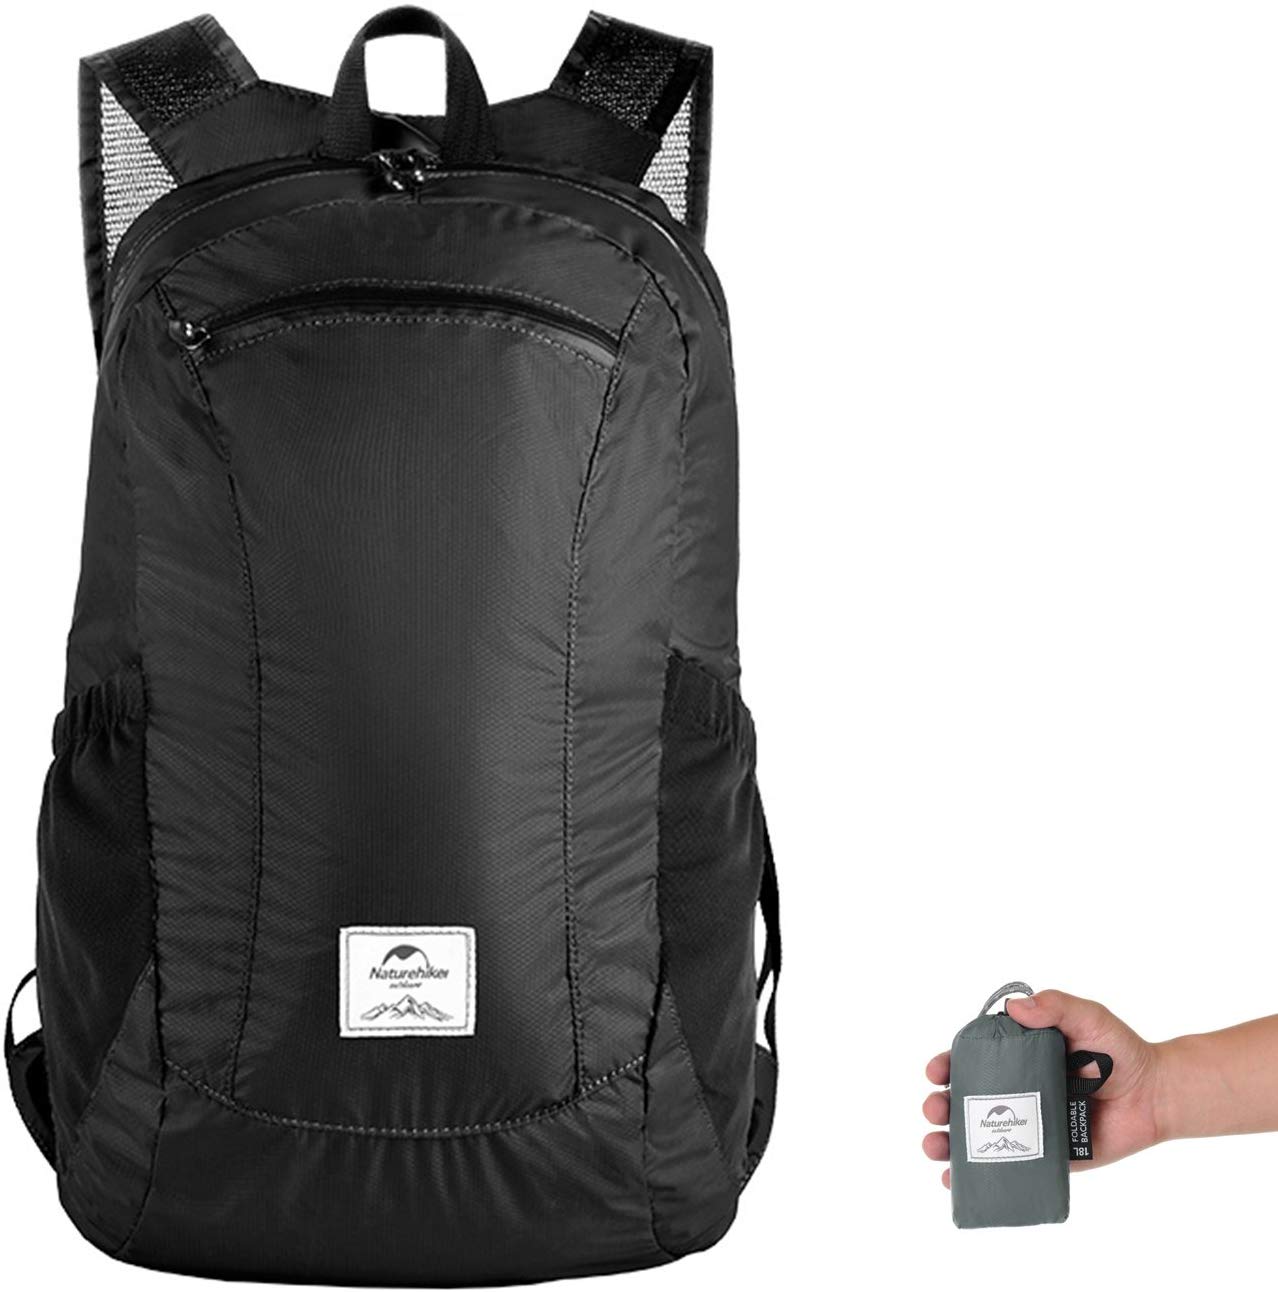 Foldable Daypack